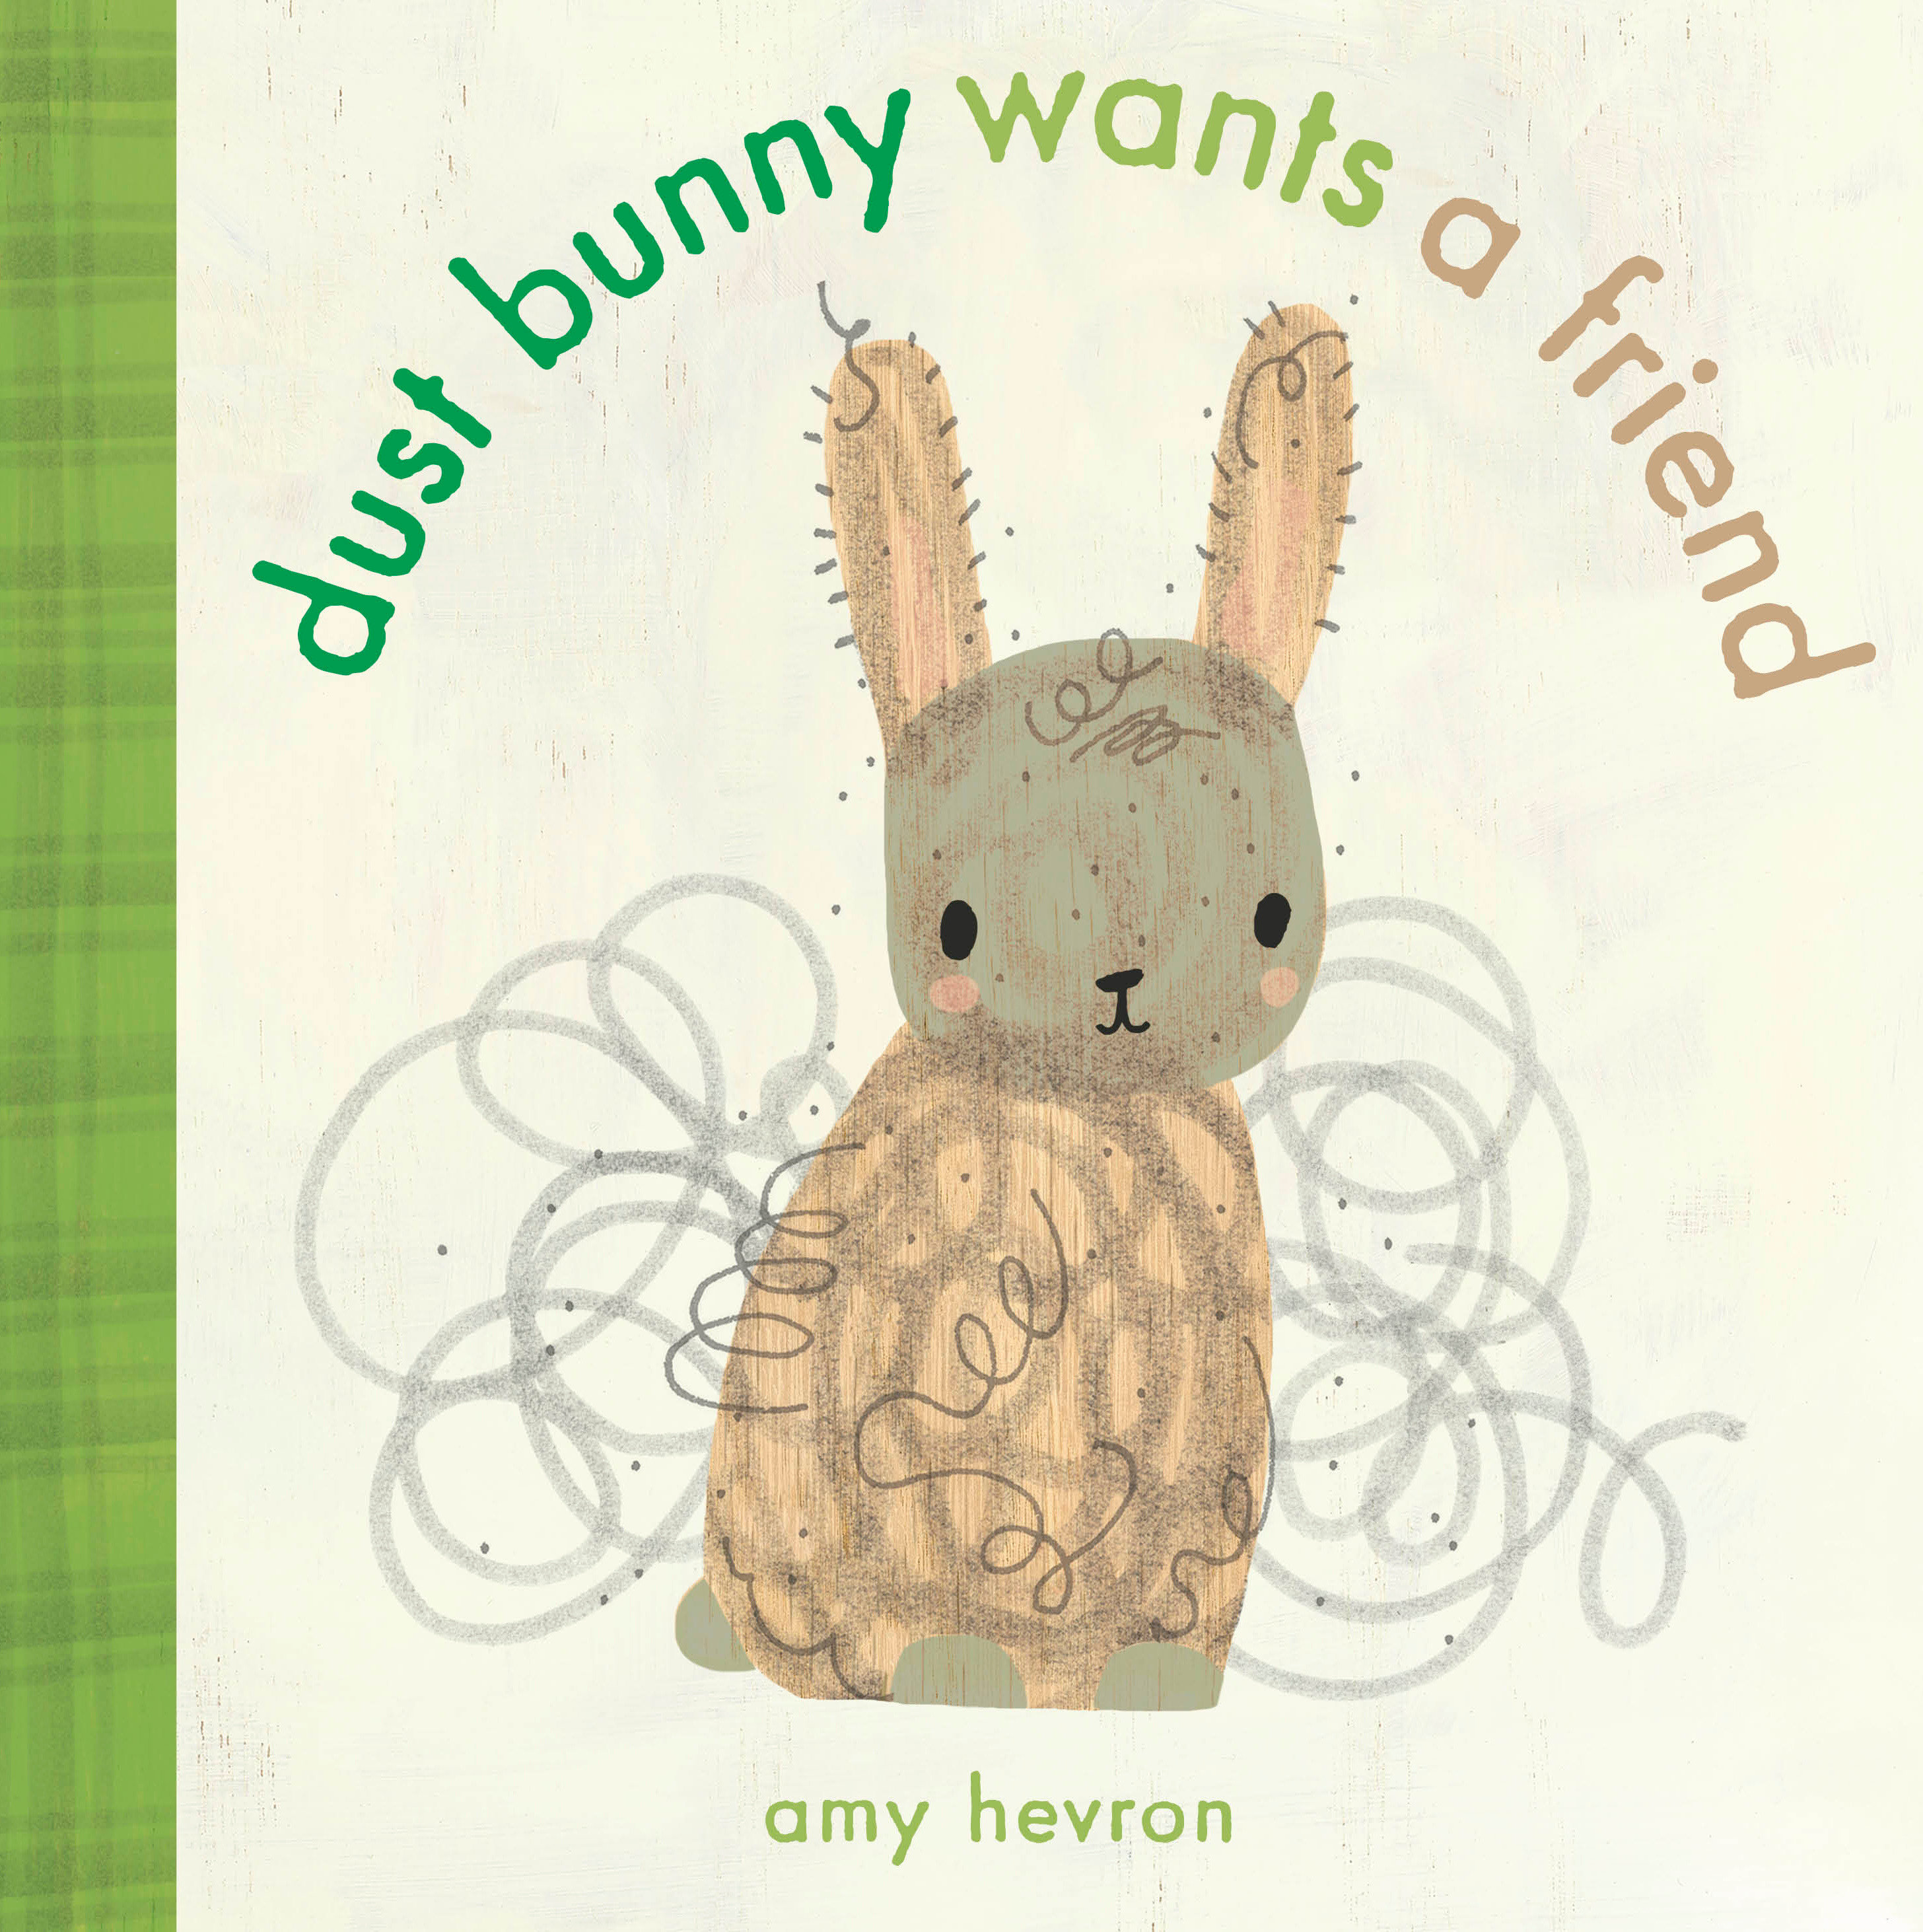 Dust Bunny Wants A Friend (Hardcover Book)